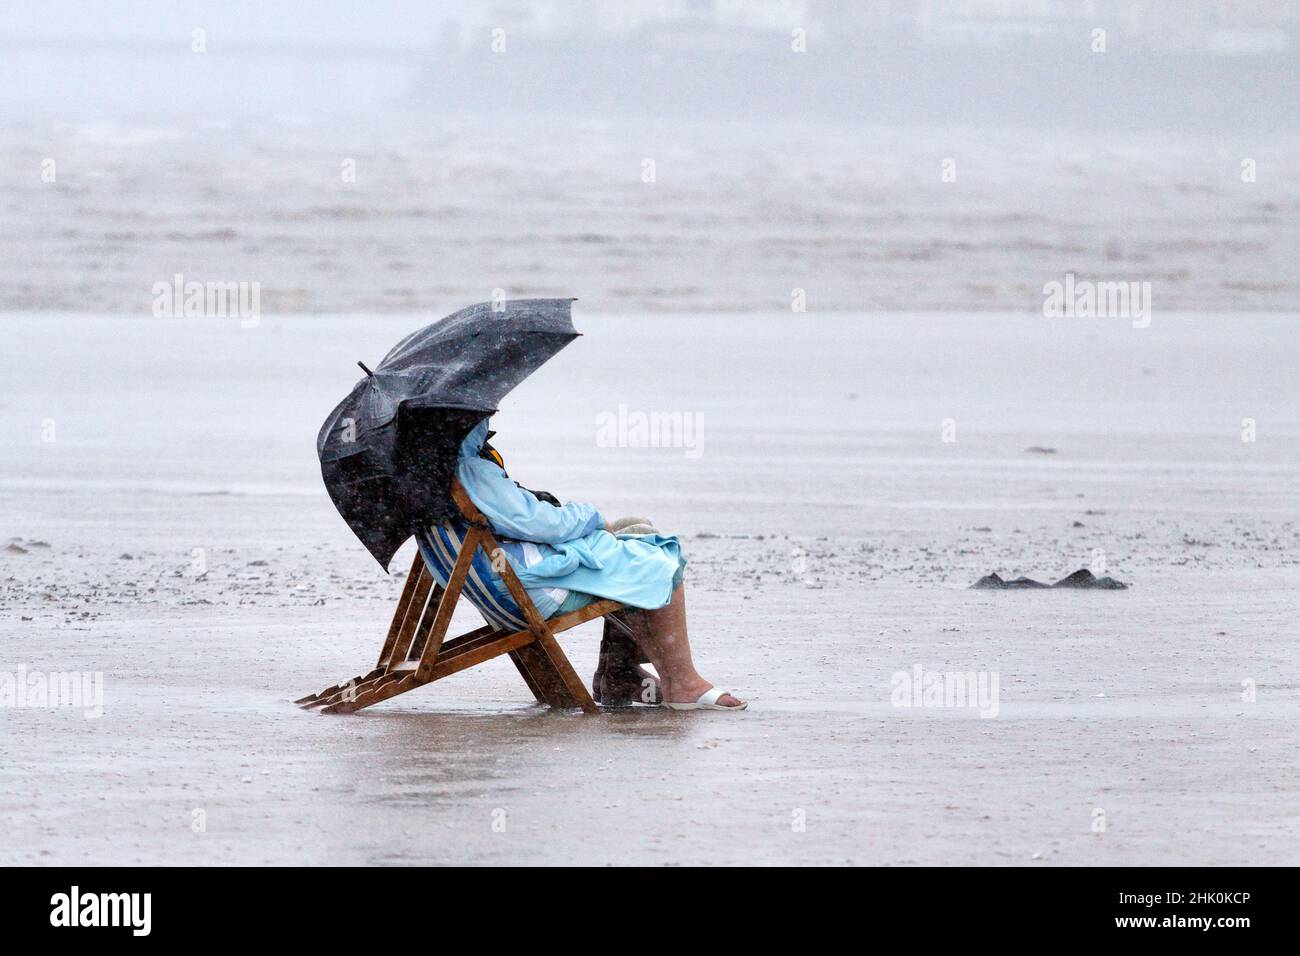 Chistes cortos o largos - Página 4 A-comical-scene-of-a-man-and-a-woman-sitting-in-deck-chairs-on-a-british-beach-in-rain-coats-during-a-heavy-rain-storm-inclement-summer-weather-2HK0KCP